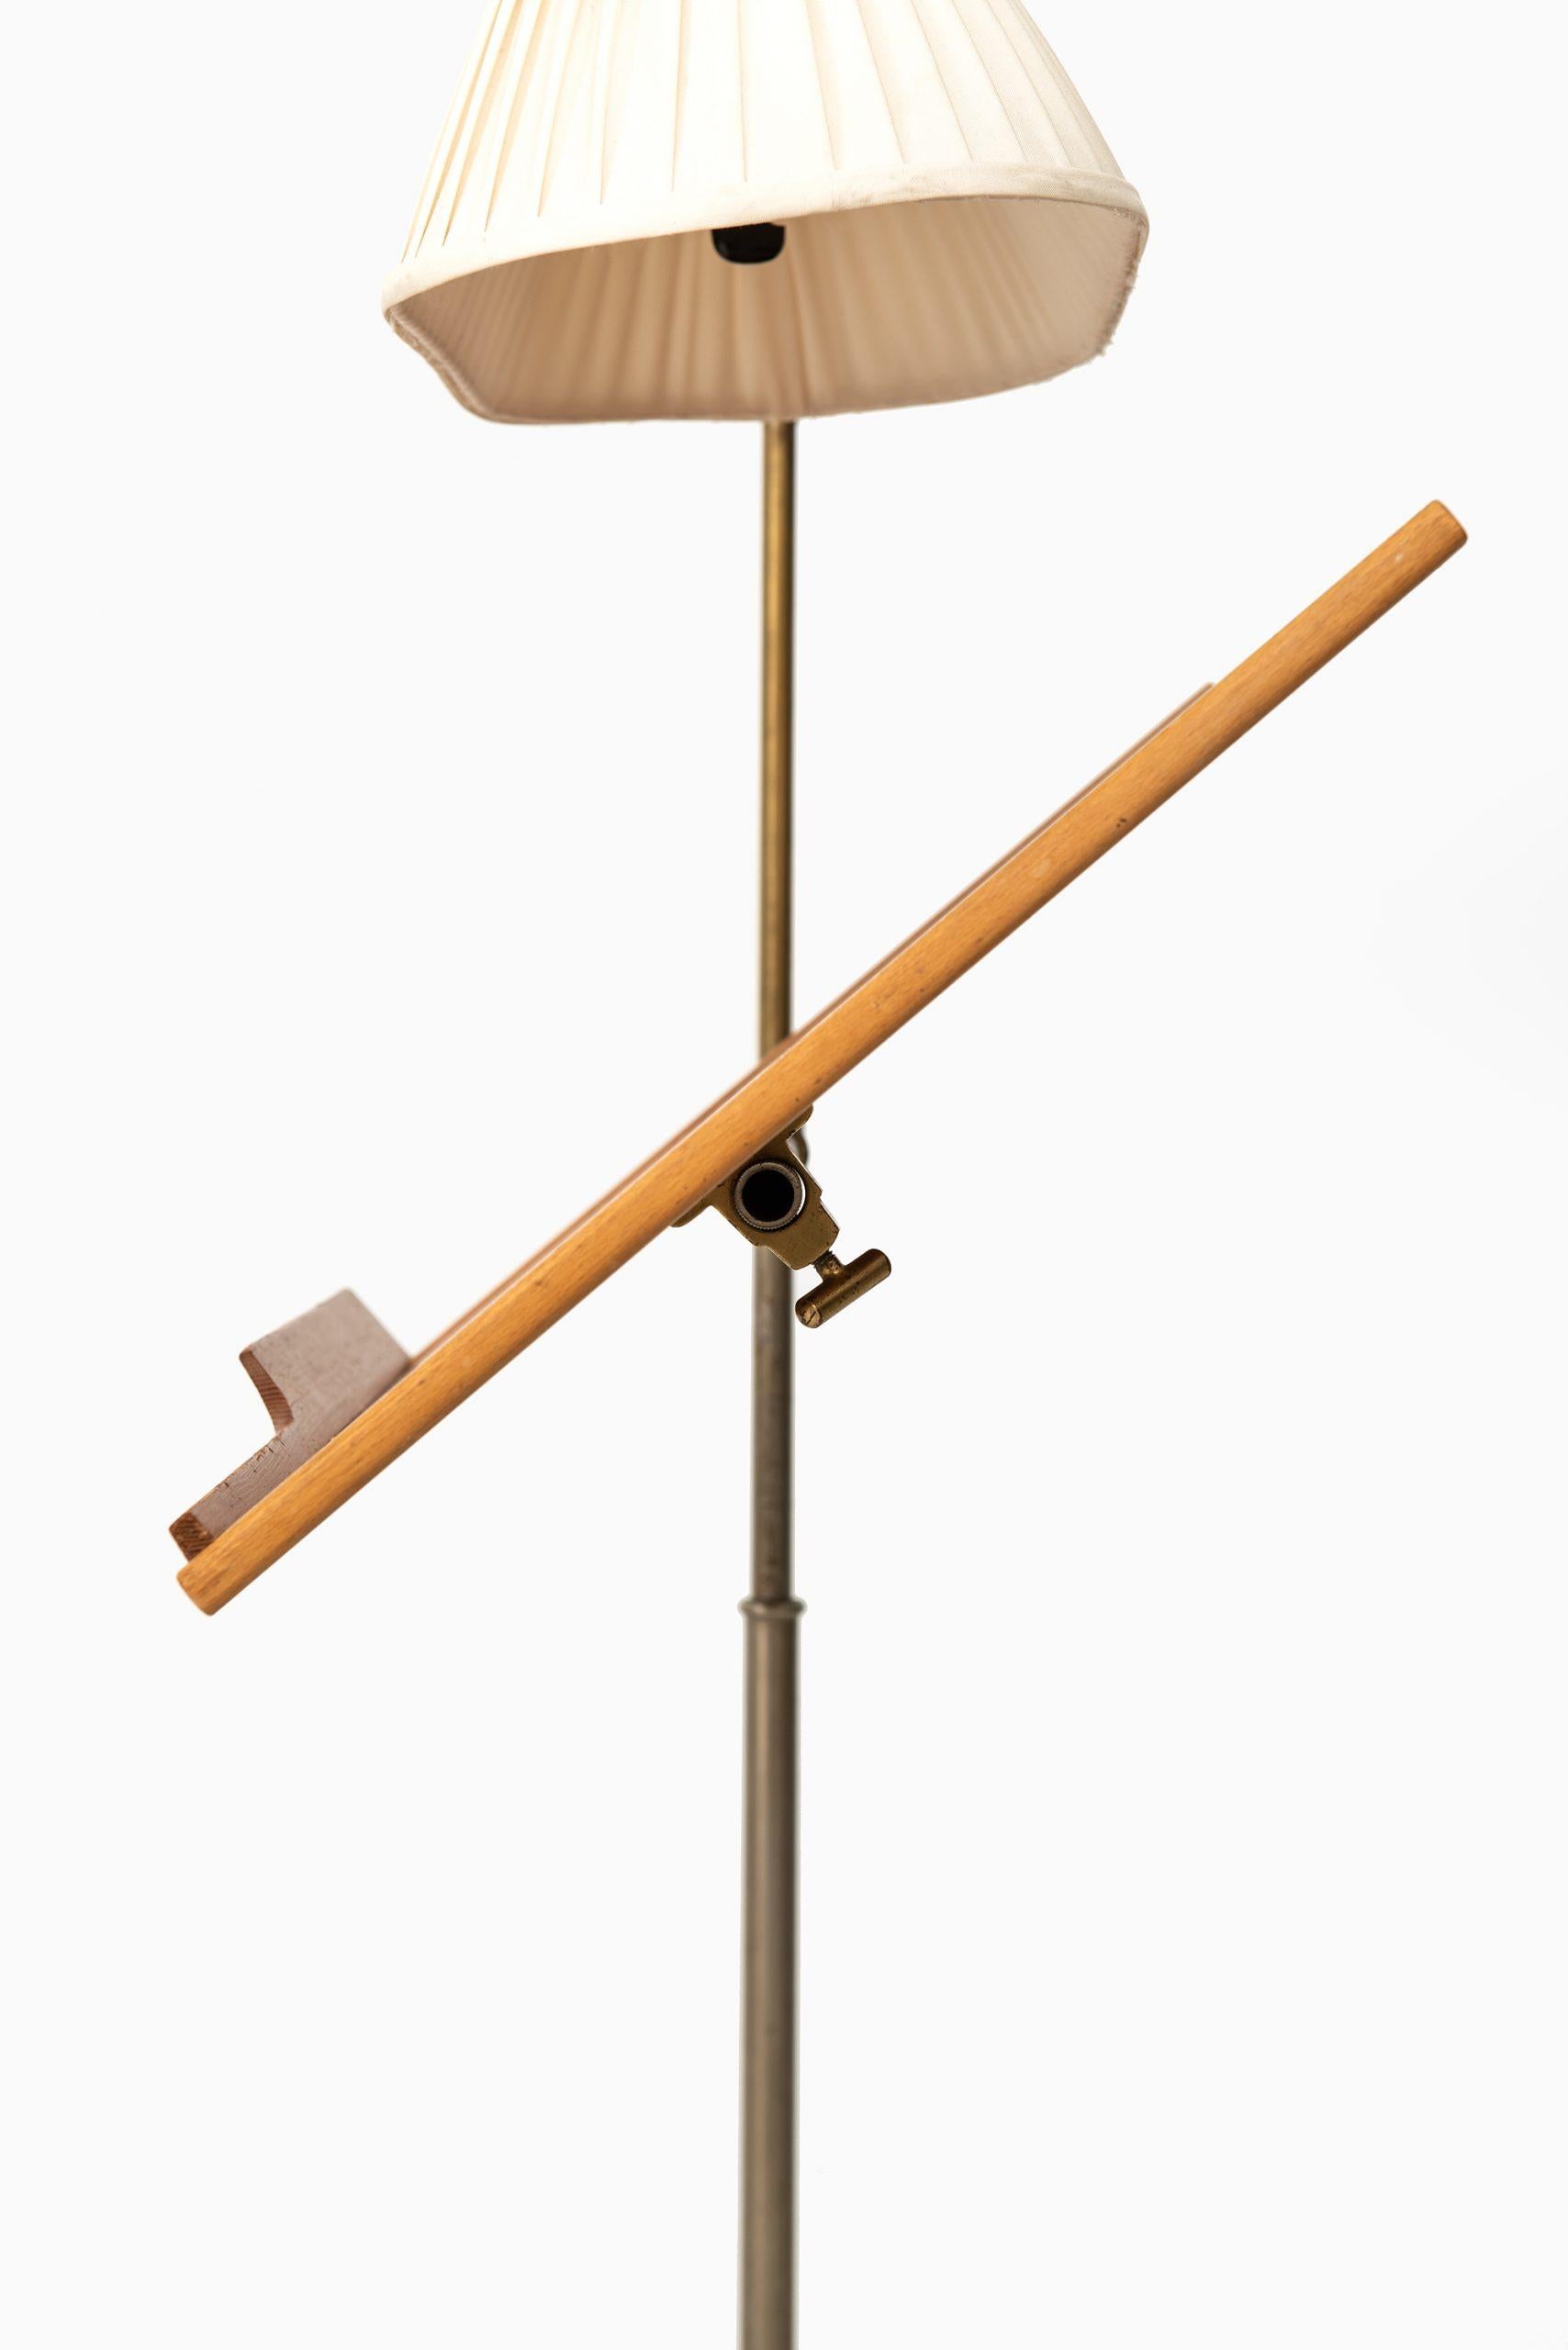 Bruno Mathsson Reading Stand Produced by Karl Mathsson in Värnamo, Sweden In Good Condition For Sale In Limhamn, Skåne län